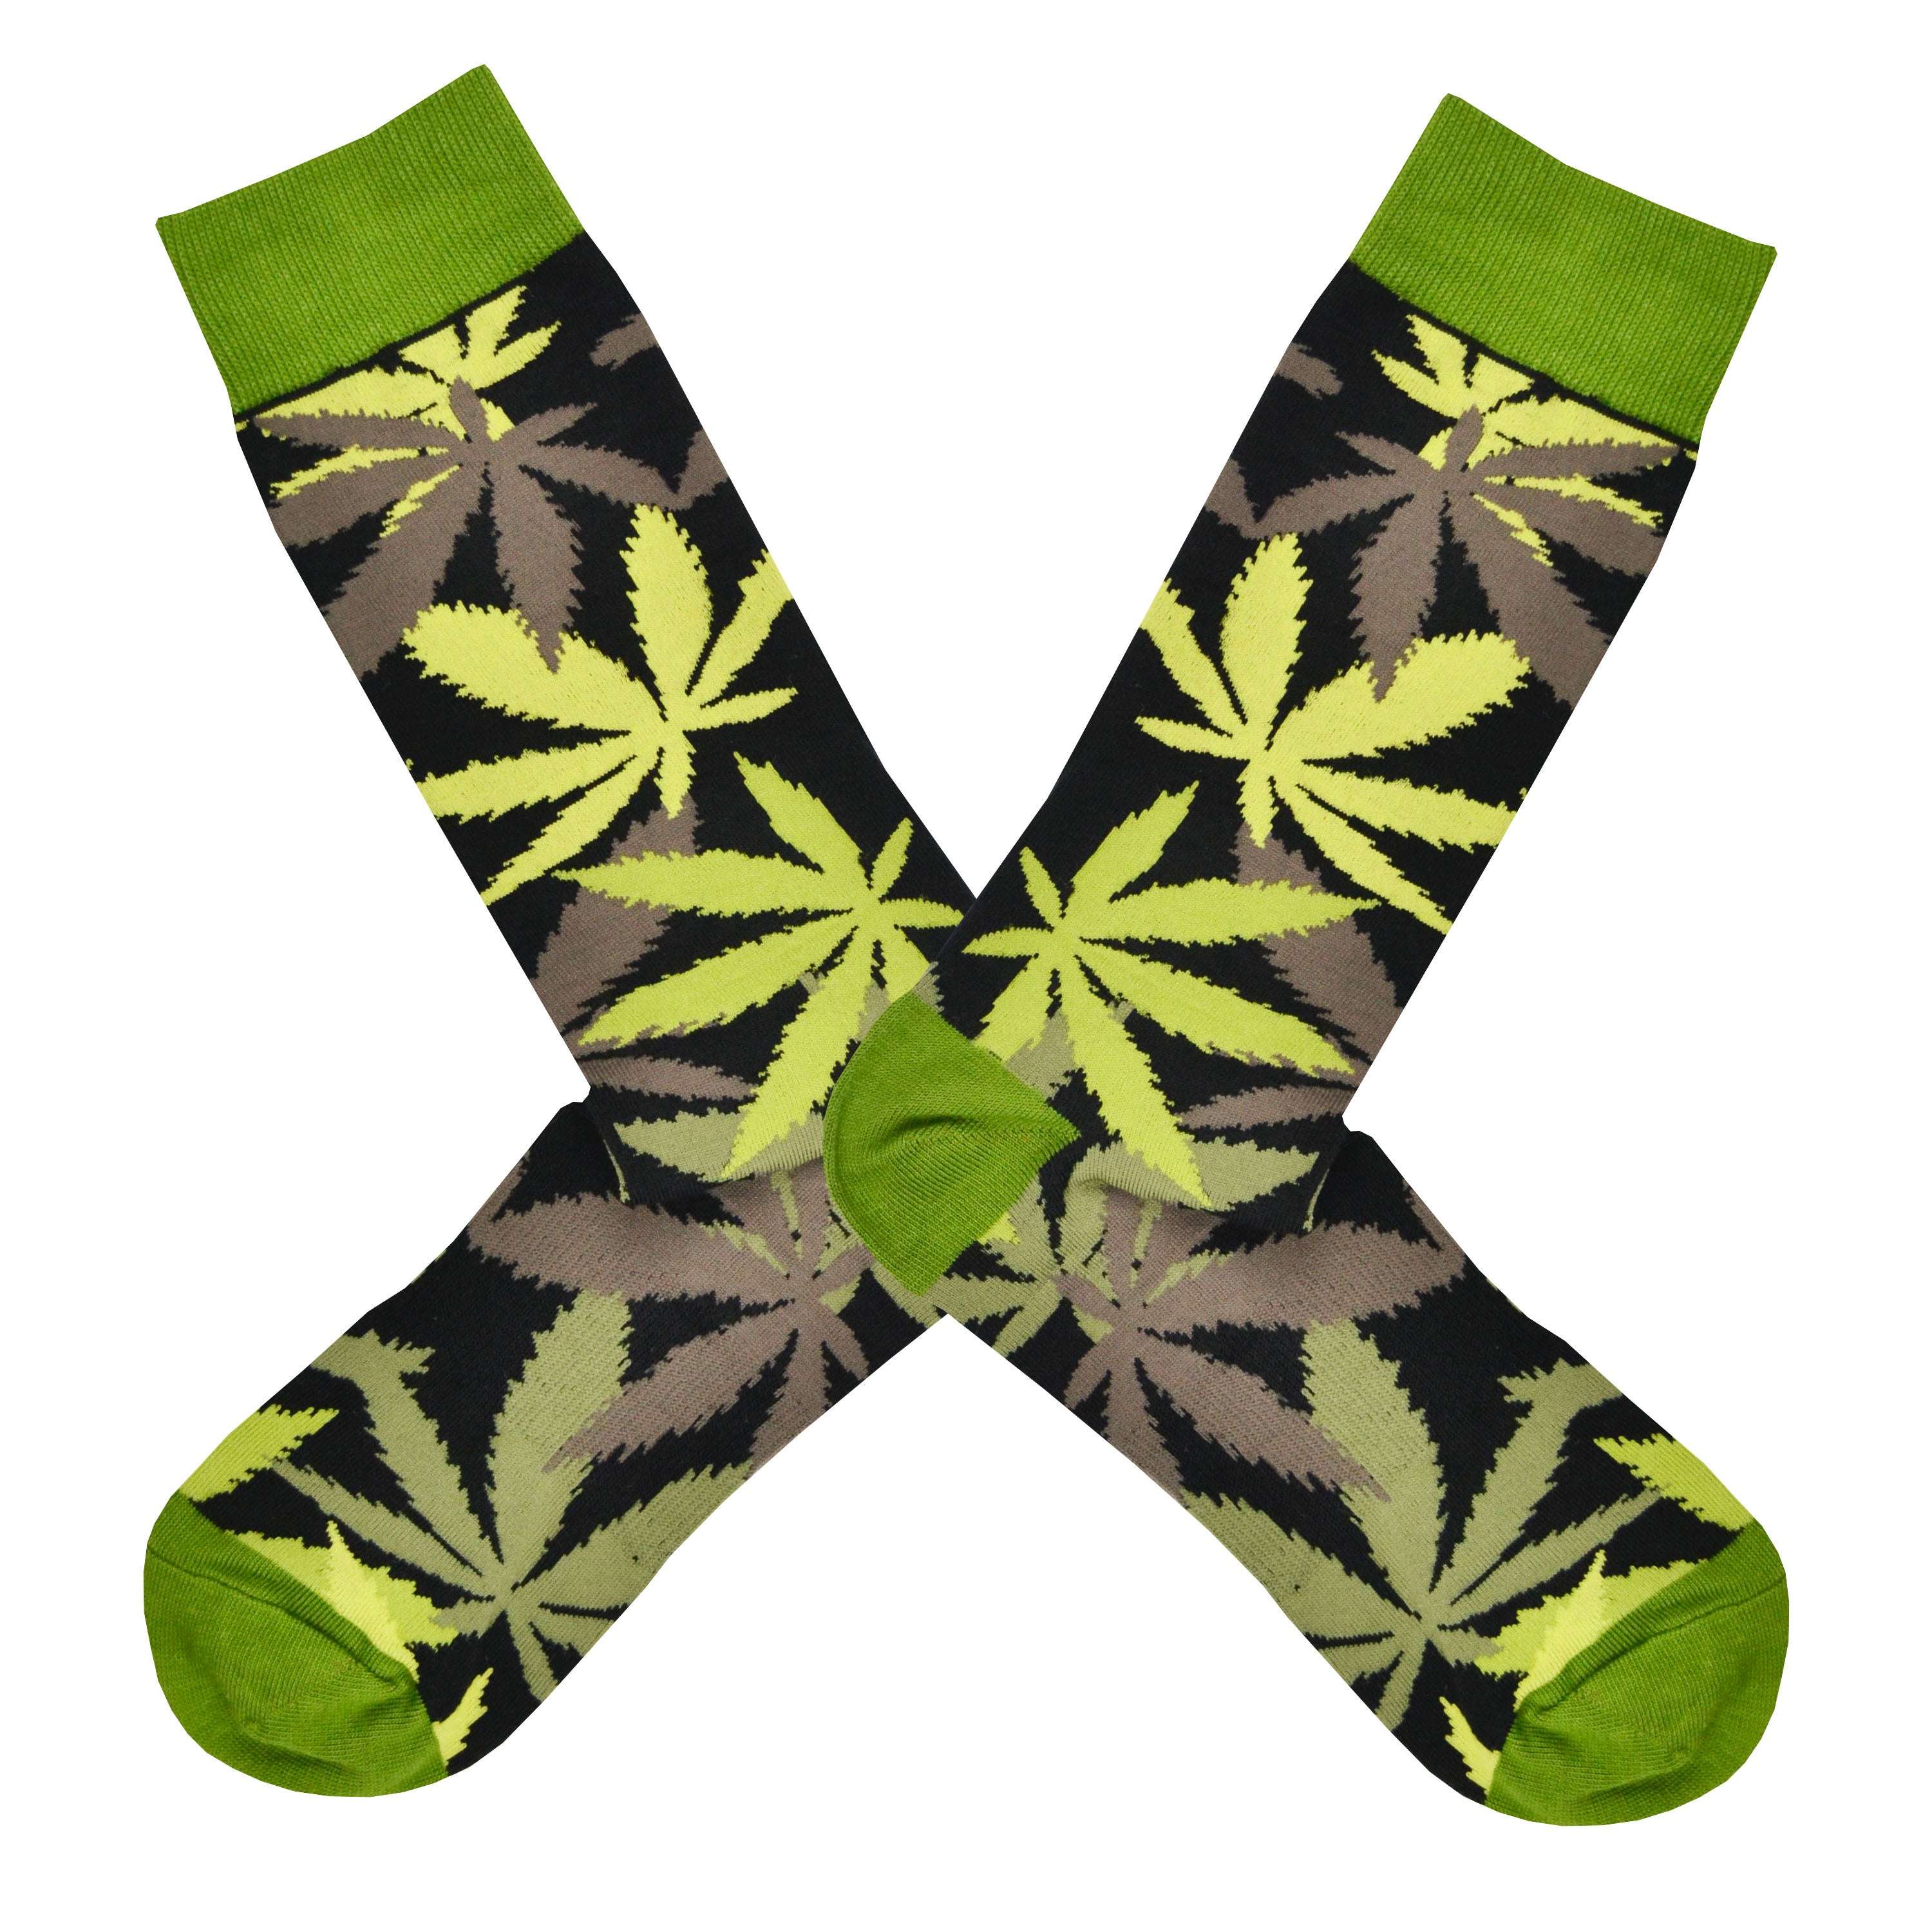 Shown in a flatlay, a pair of men's crew length K.Bell brand nylon and cotton socks in black with a bright green heel, toe, and cuff. The sock features an all over motif of marijuana leaves in shades of green and brown.